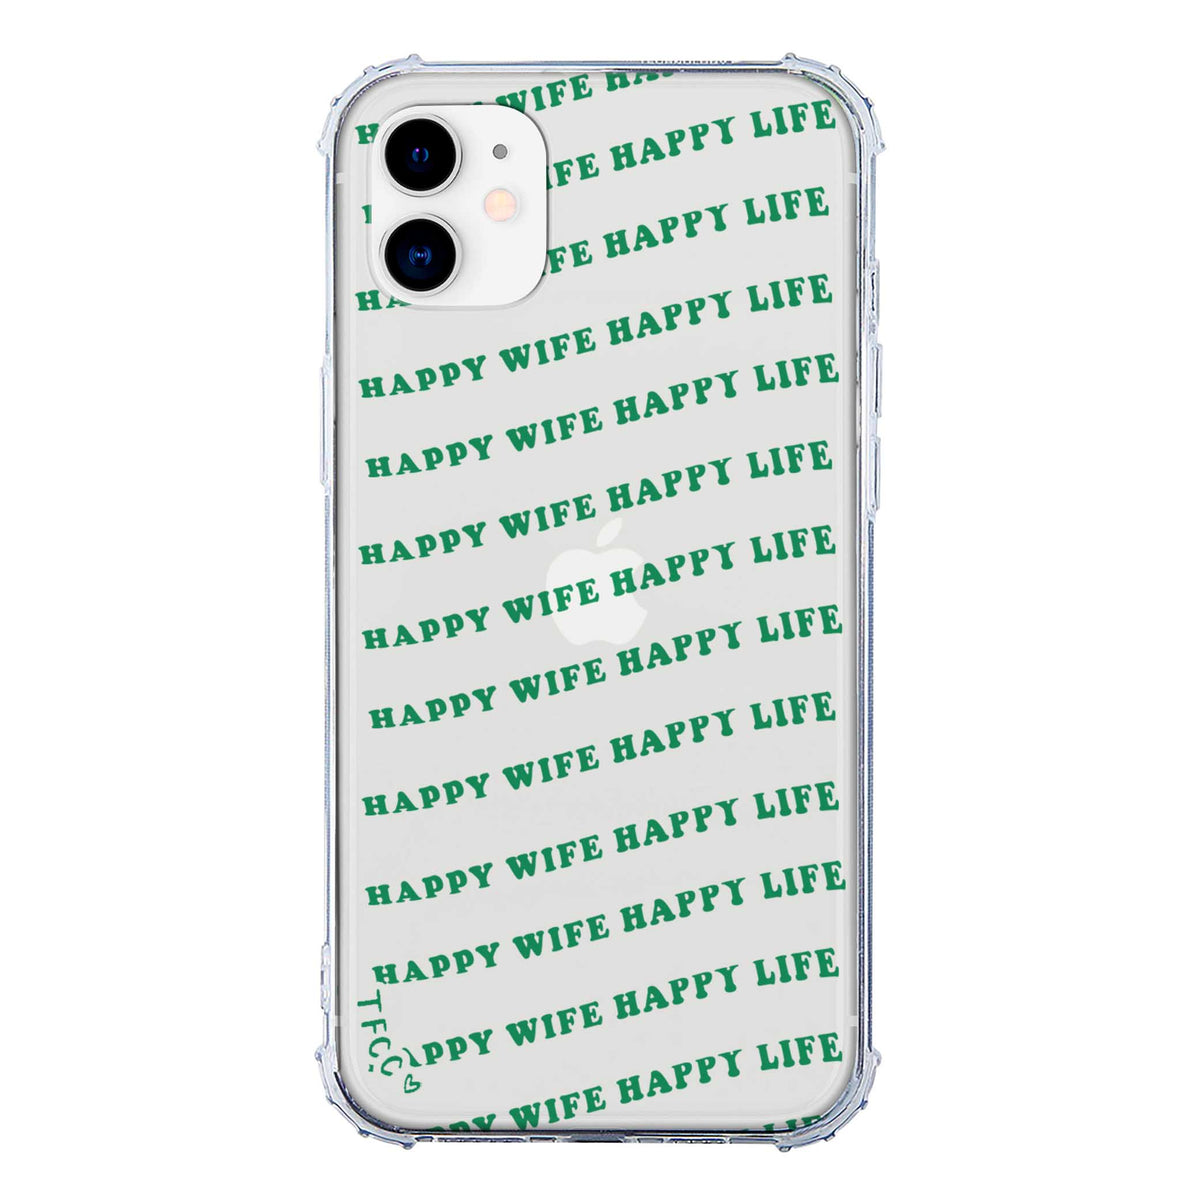 HAPPY WIFE HAPPY LIFE CLEAR CASE - thefonecasecompany